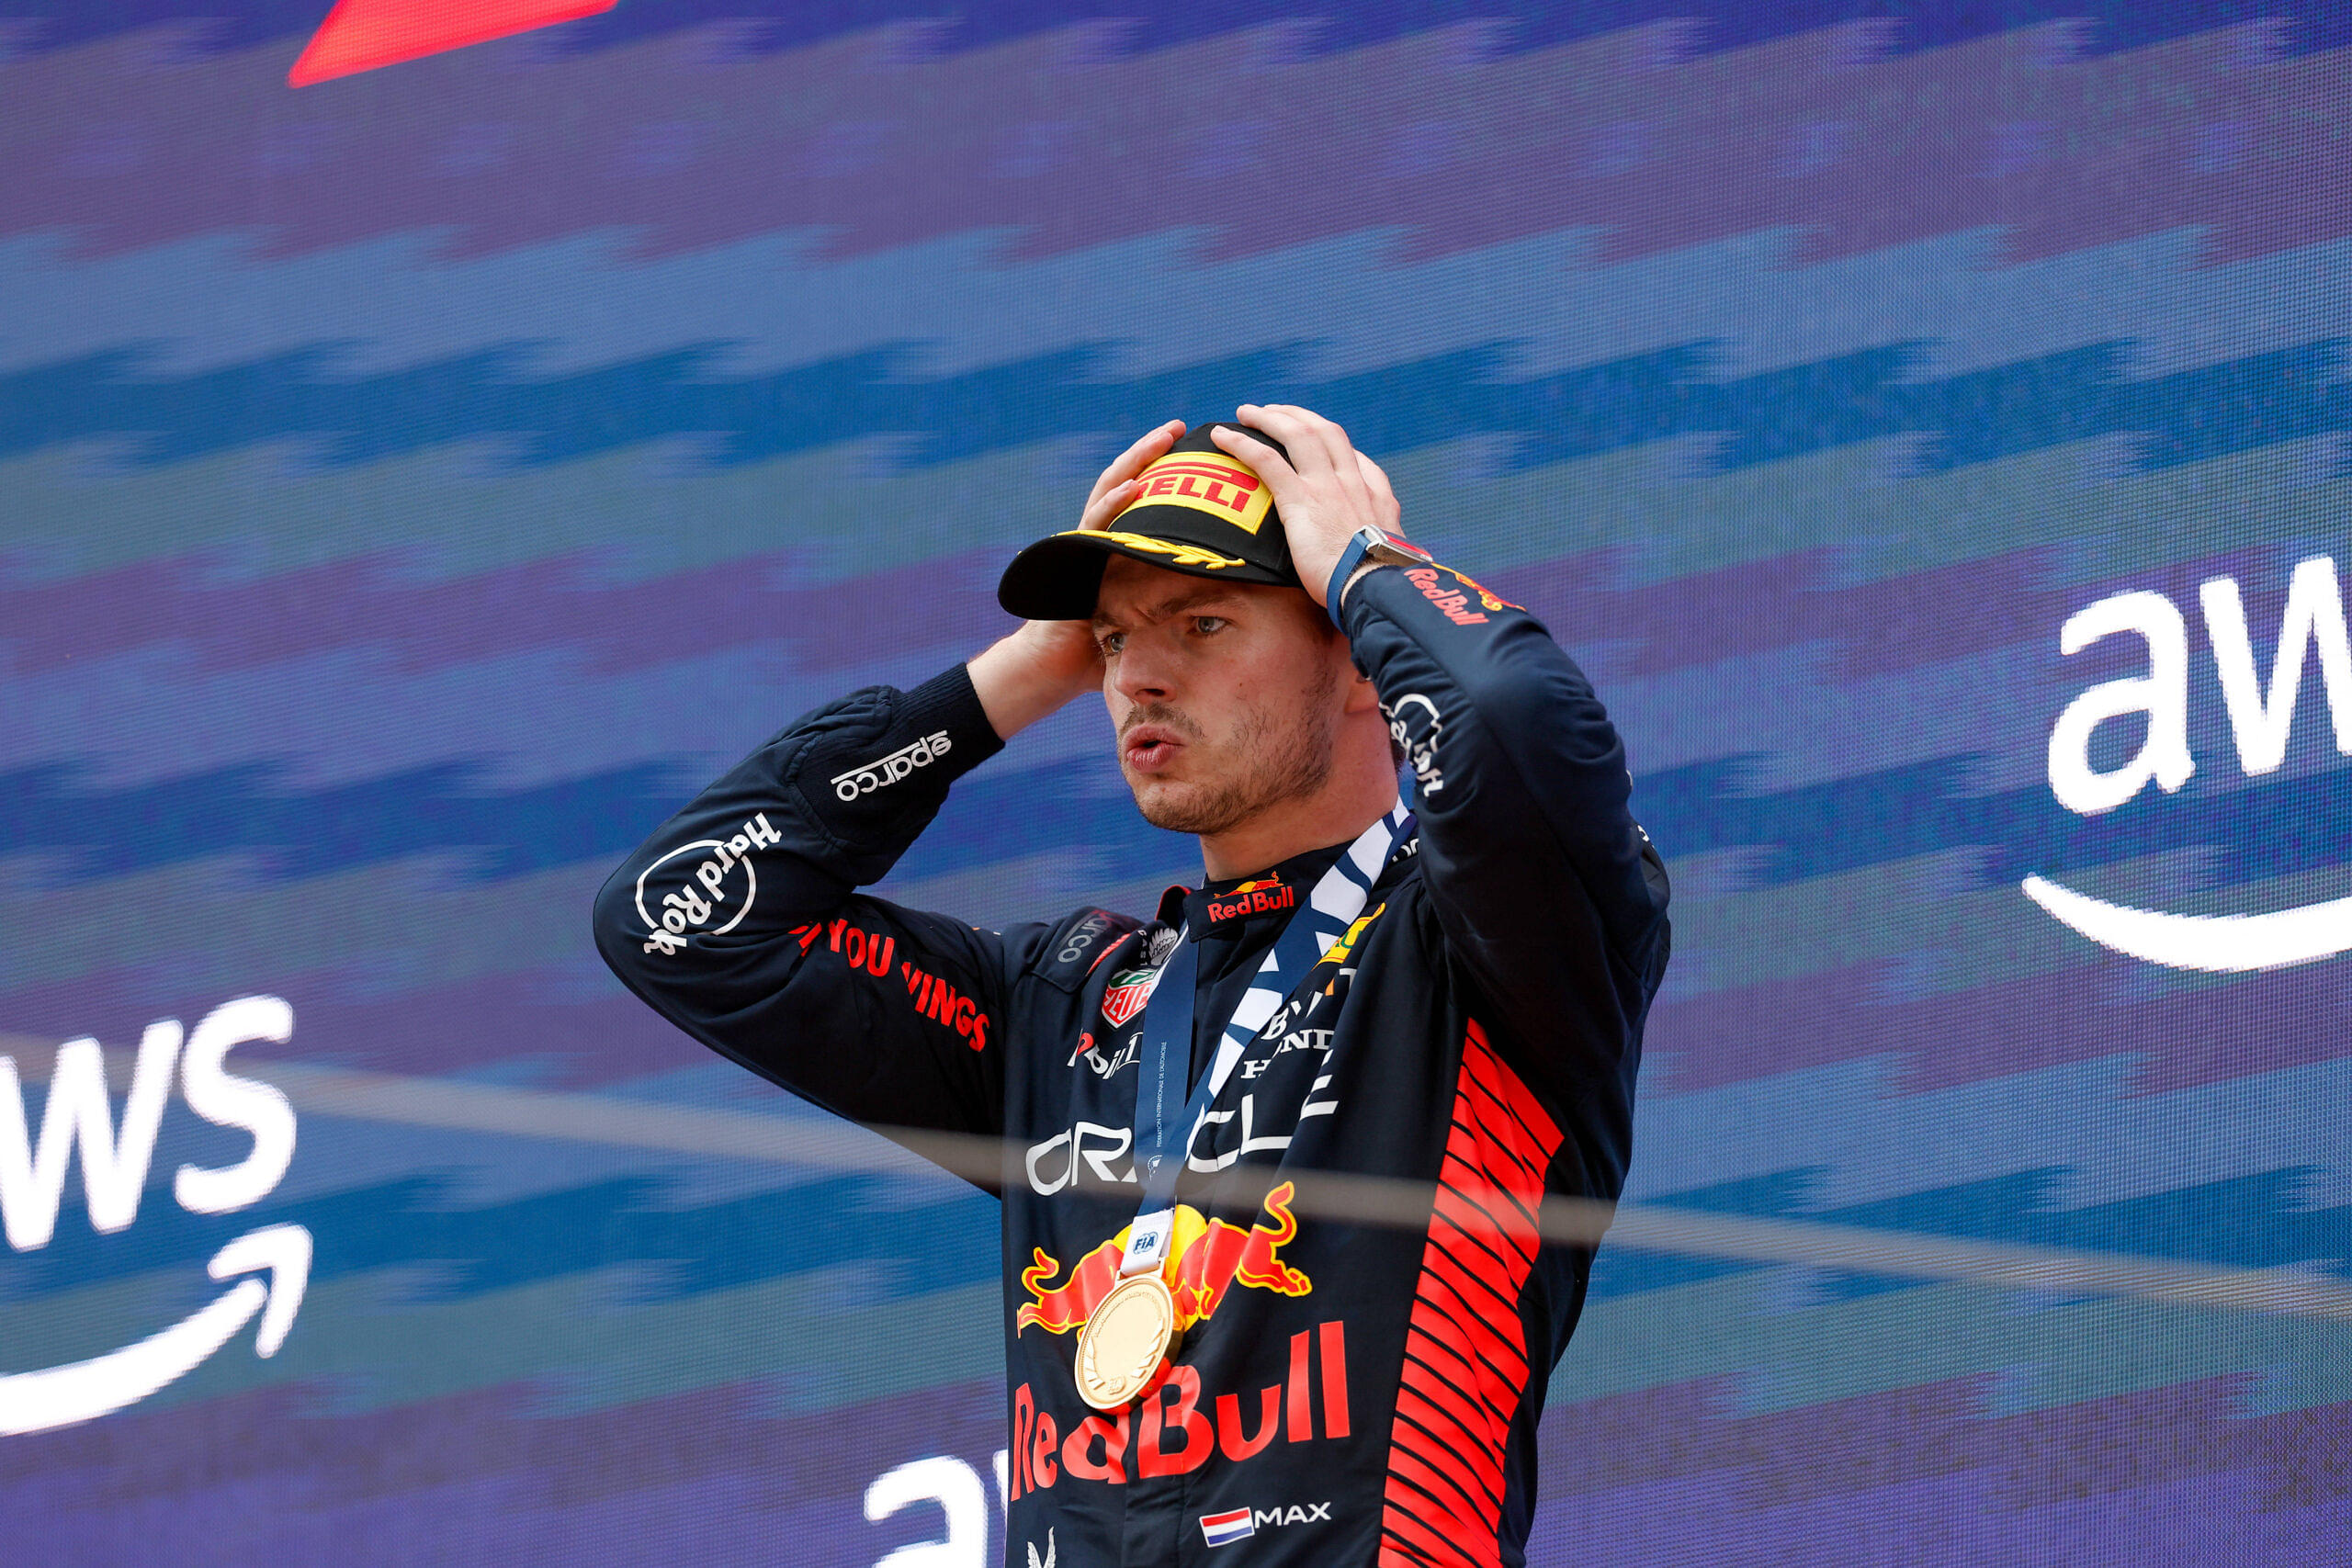 Red Bull Fans Dedicate Their Child’s Birth to Max Verstappen Leaving Unserious Champ With Bland Two-Worded Reaction